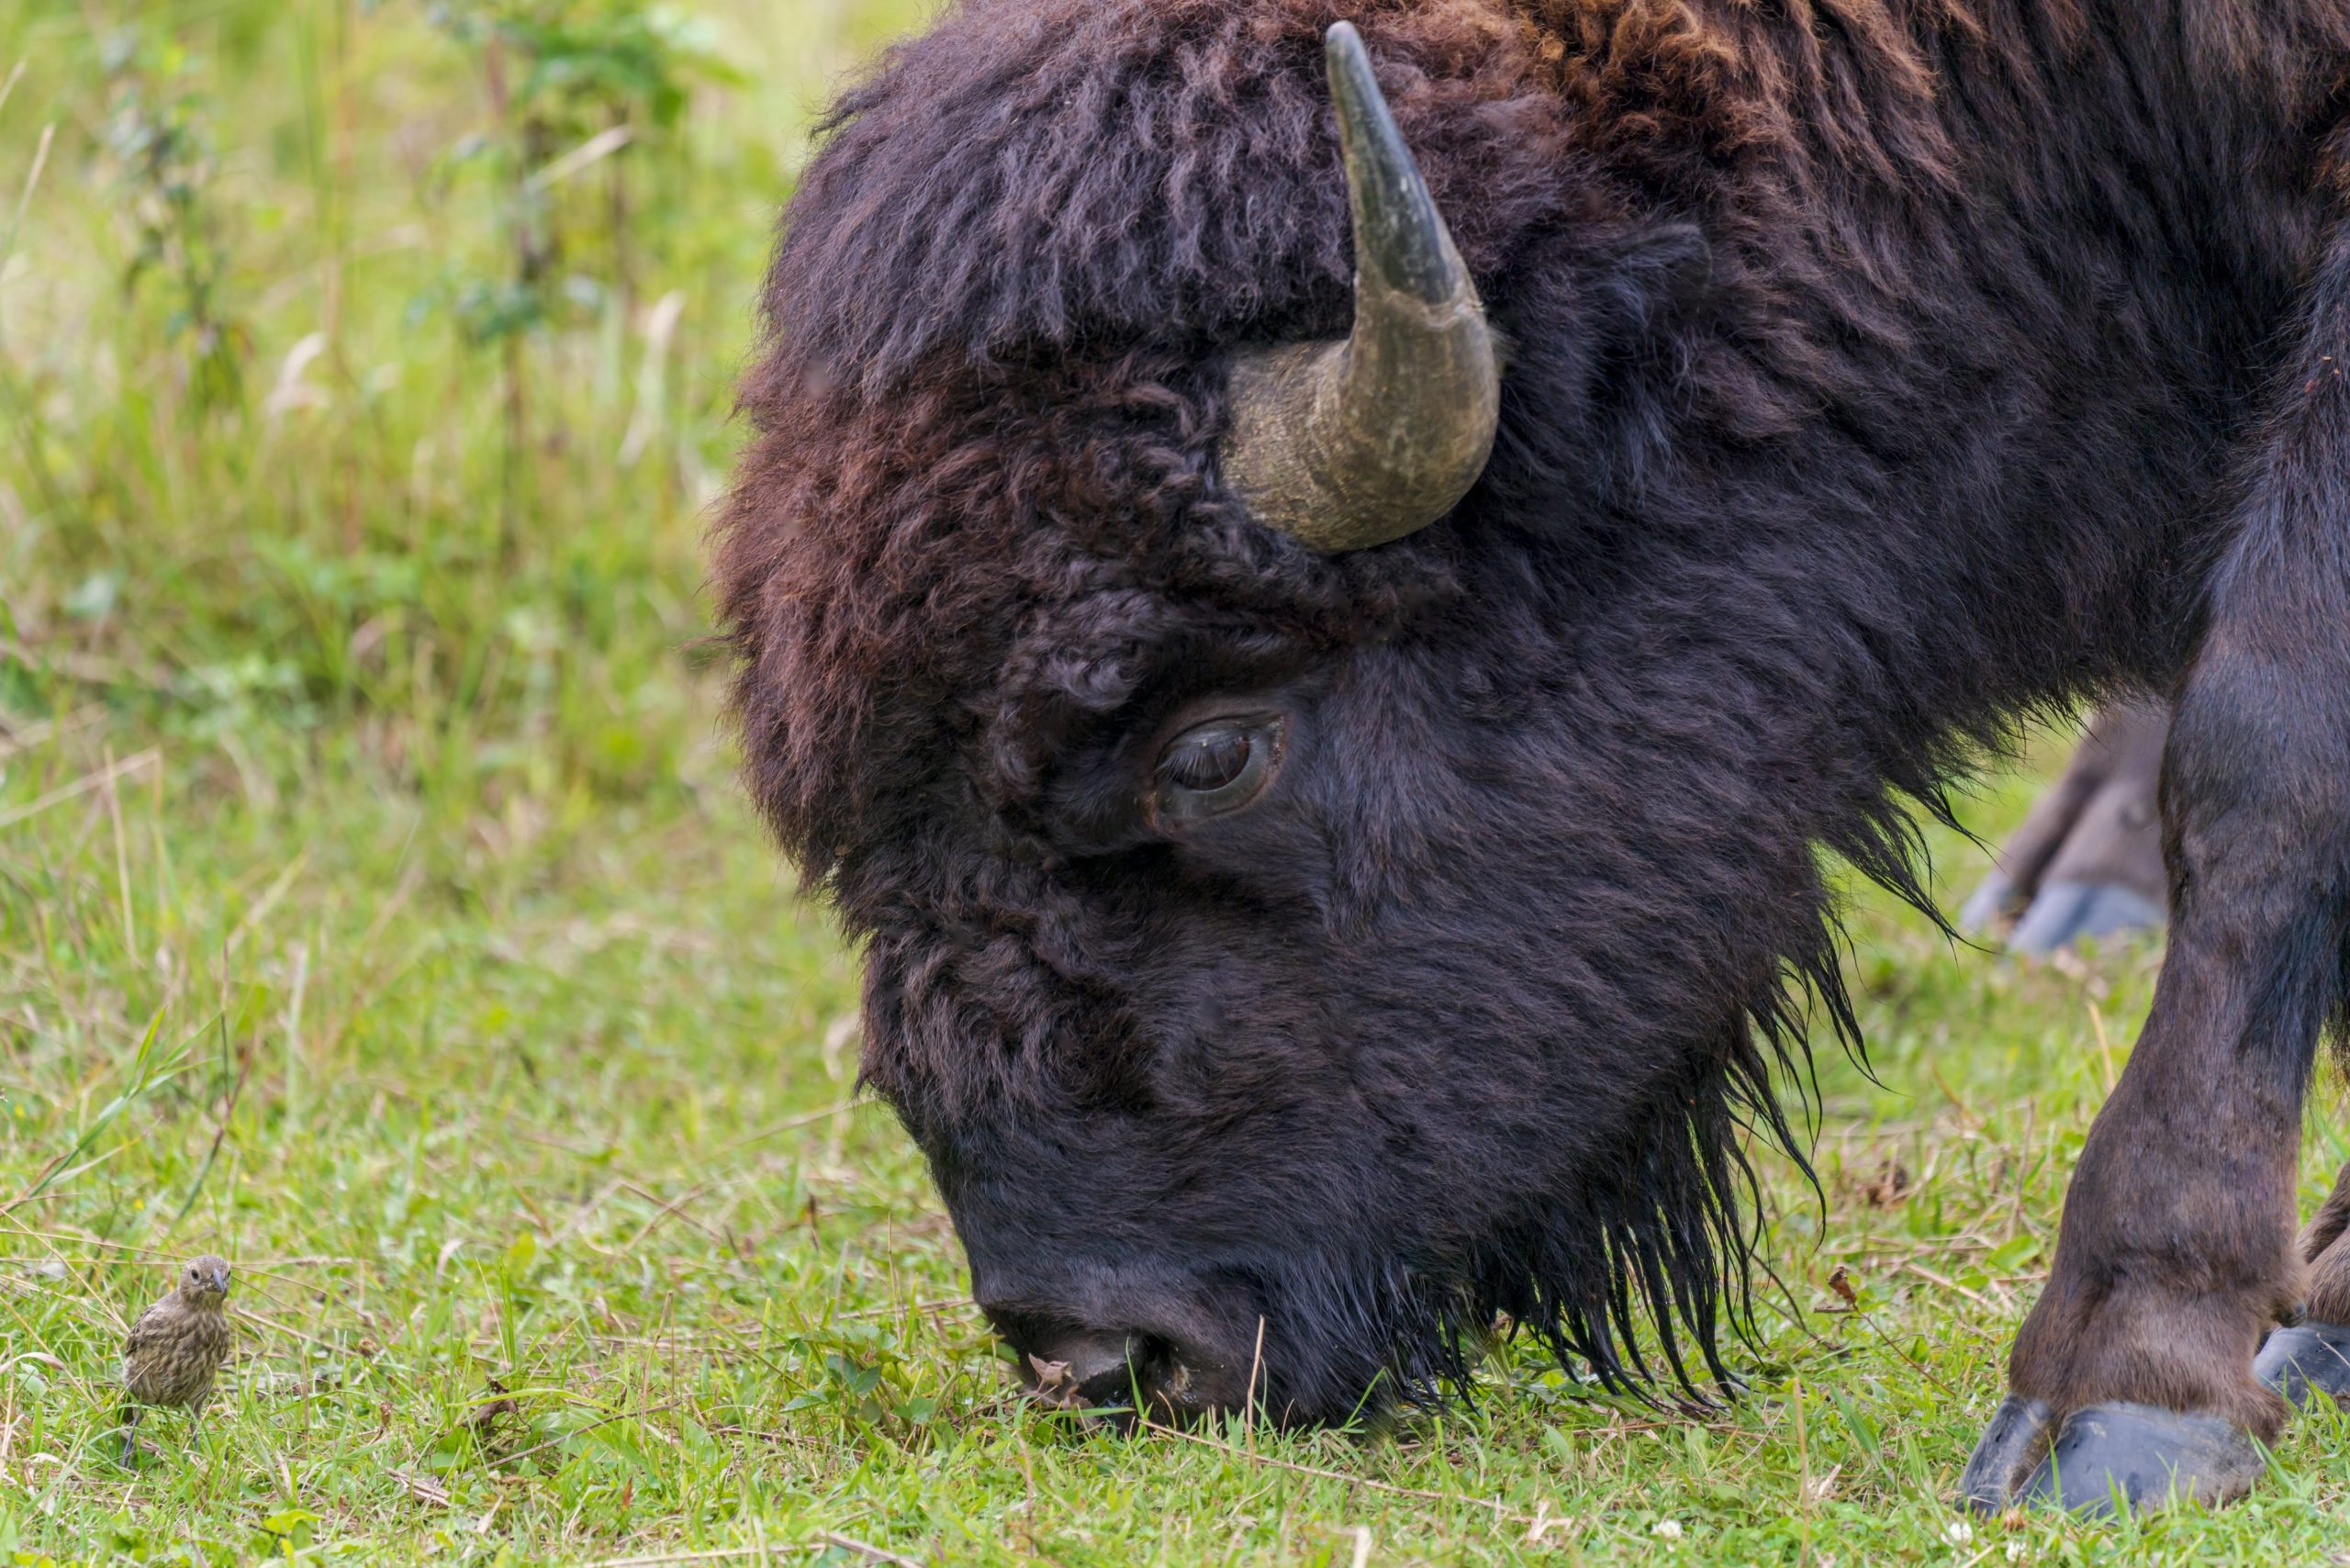 Closeup of a bison grazing. A small bird is a few inches from the bison's face.